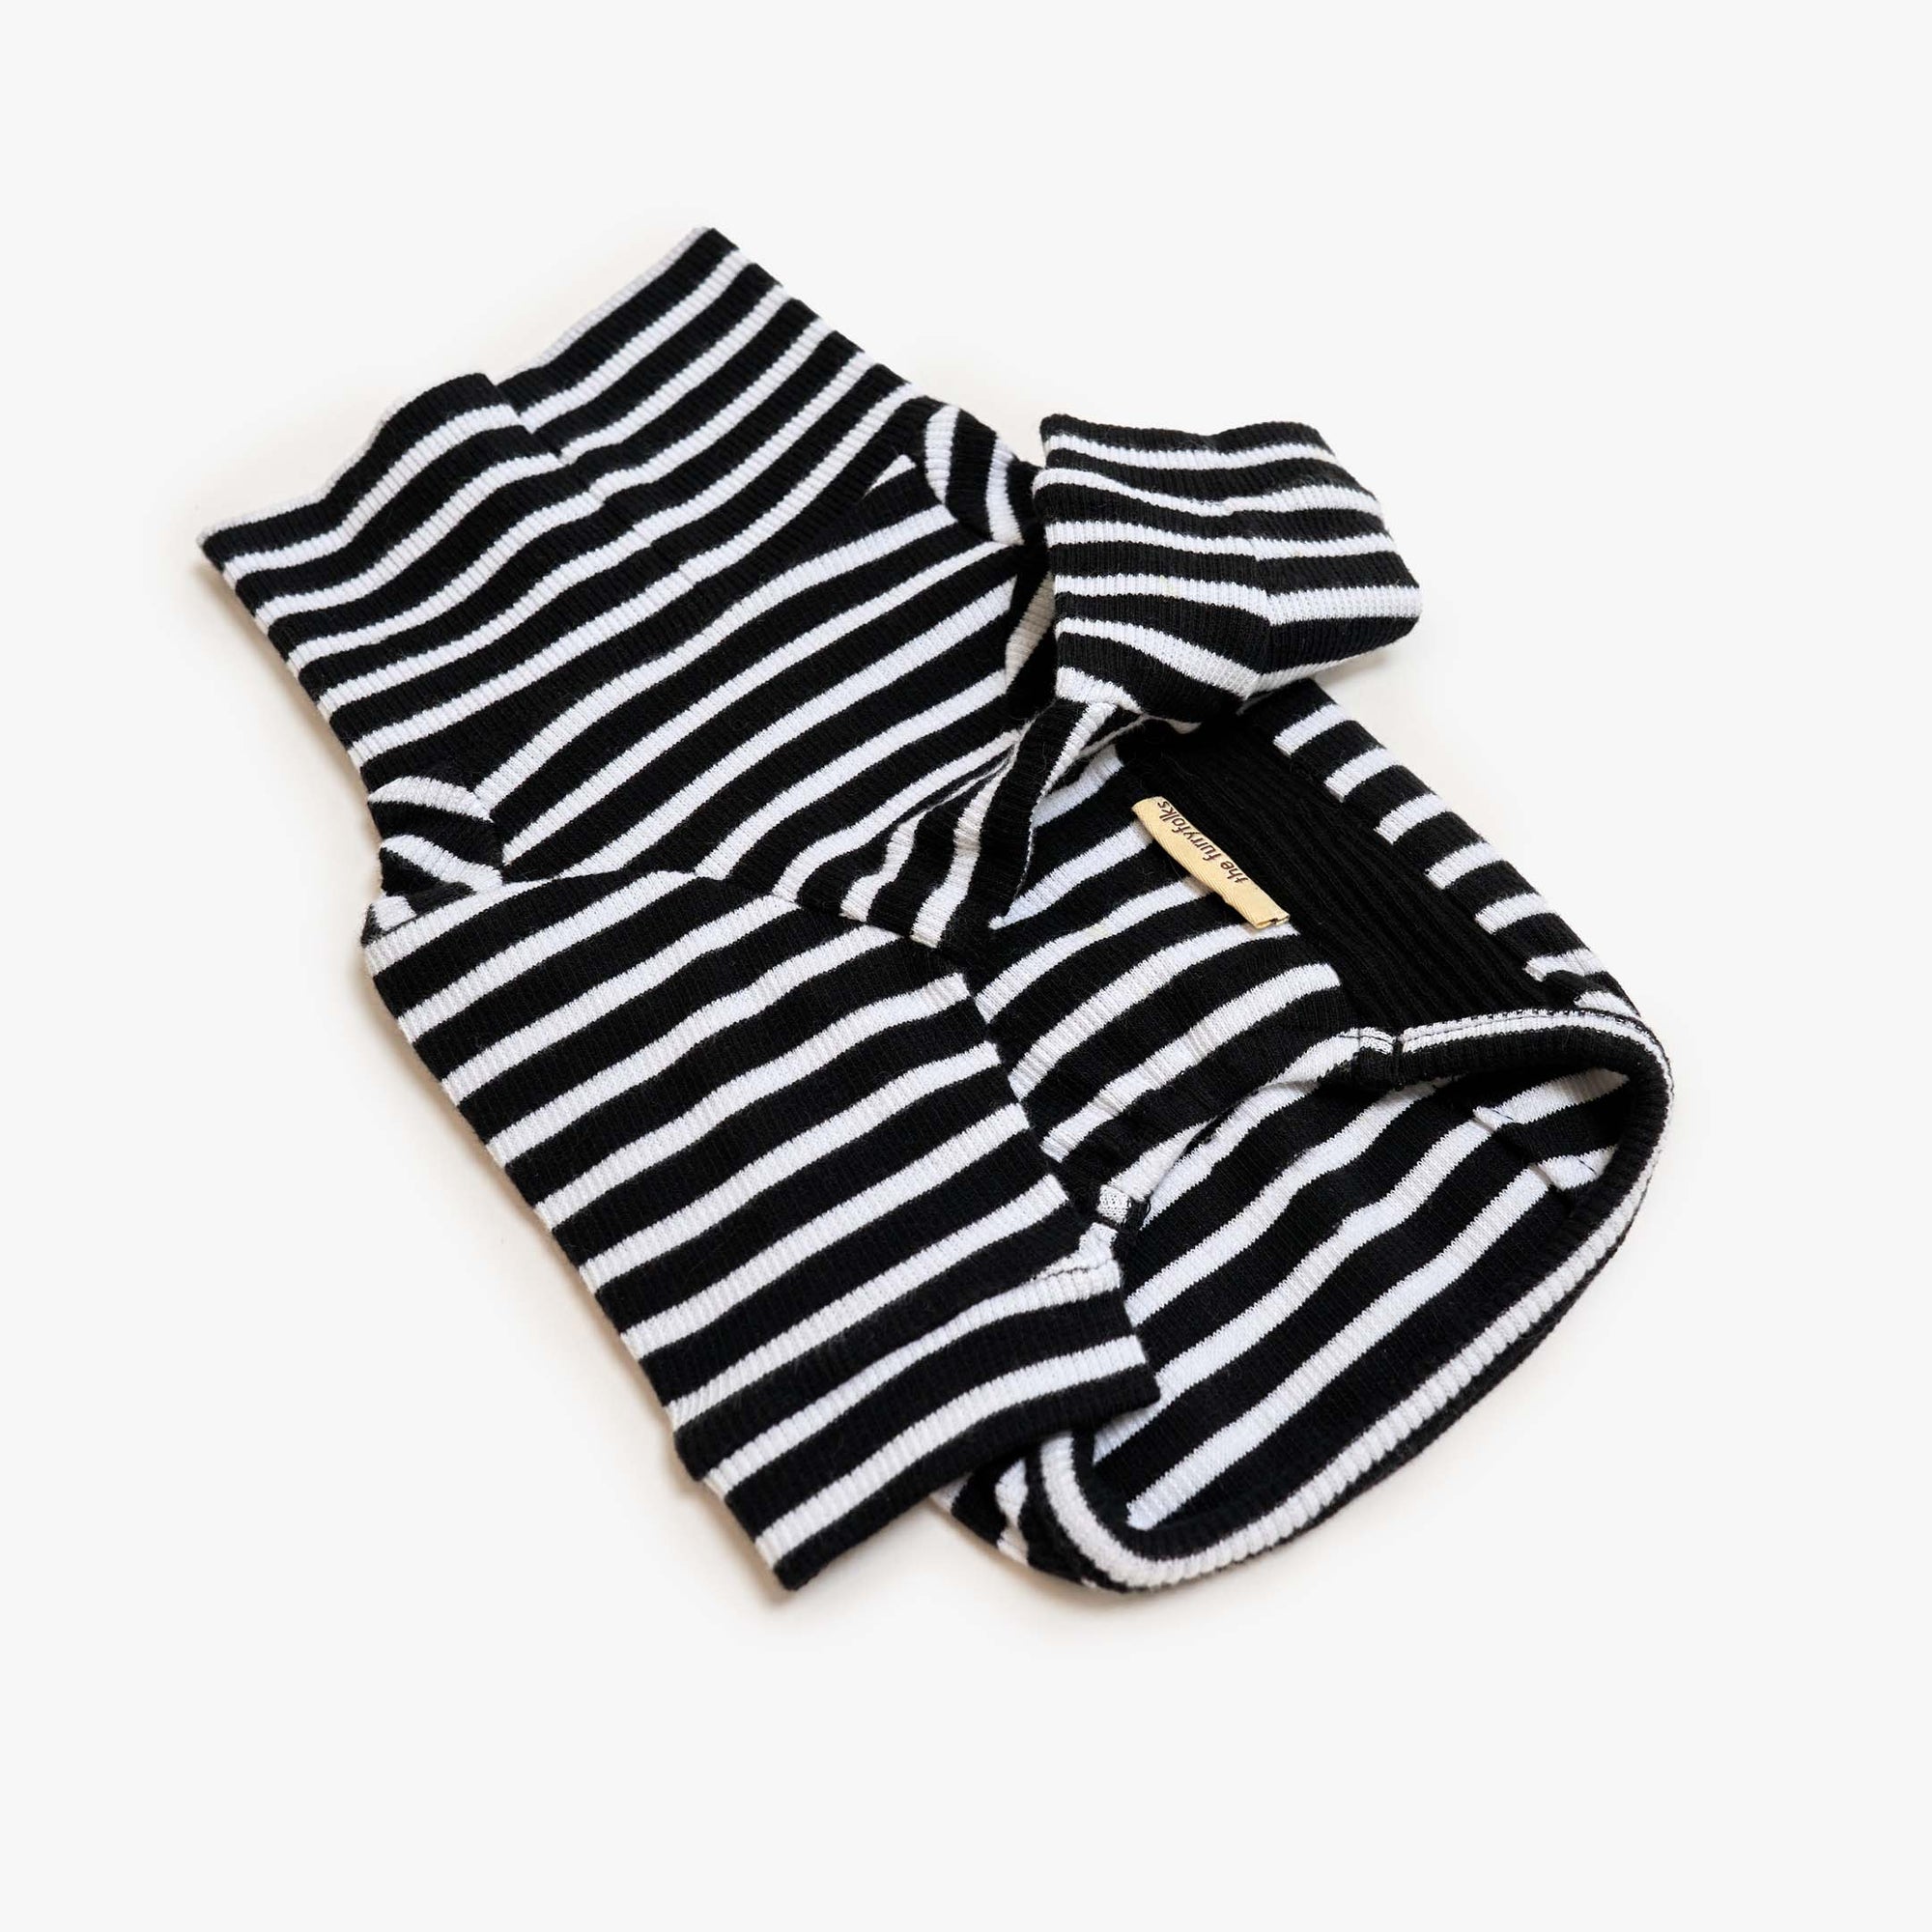 Black and white striped dog shirt with ribbed detail, ideal for stylish and comfortable pet wear.